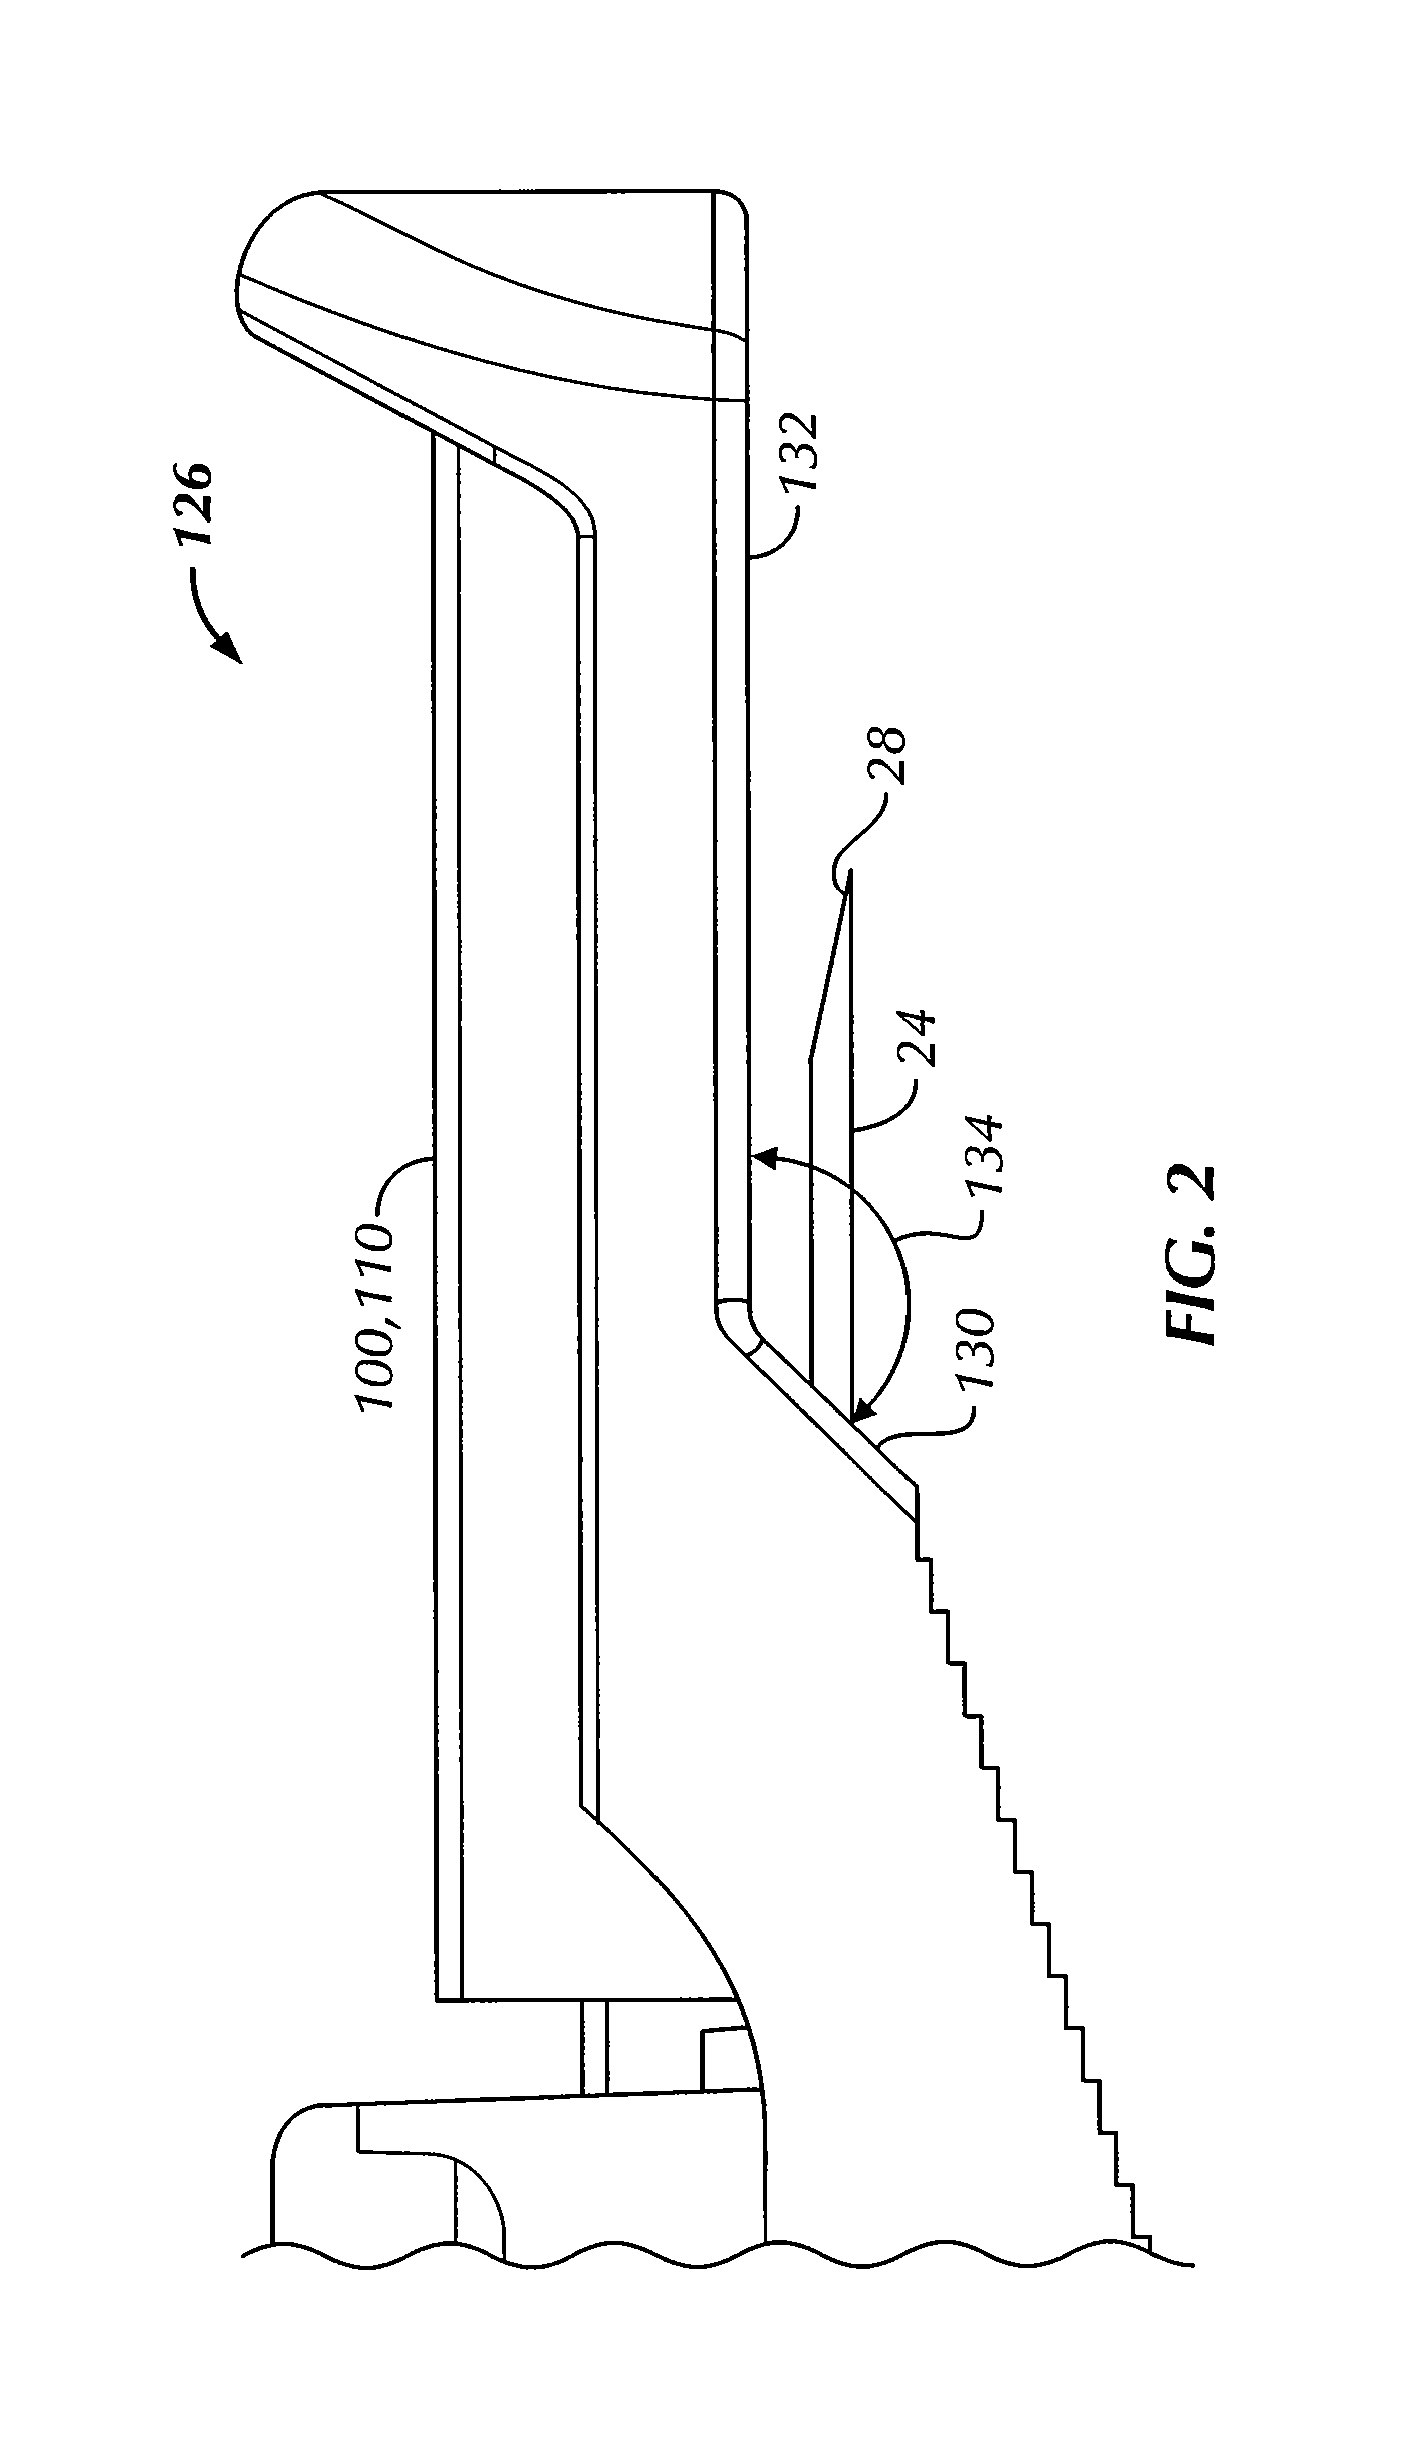 Alignment of a Needle in an Intradermal Injection Device